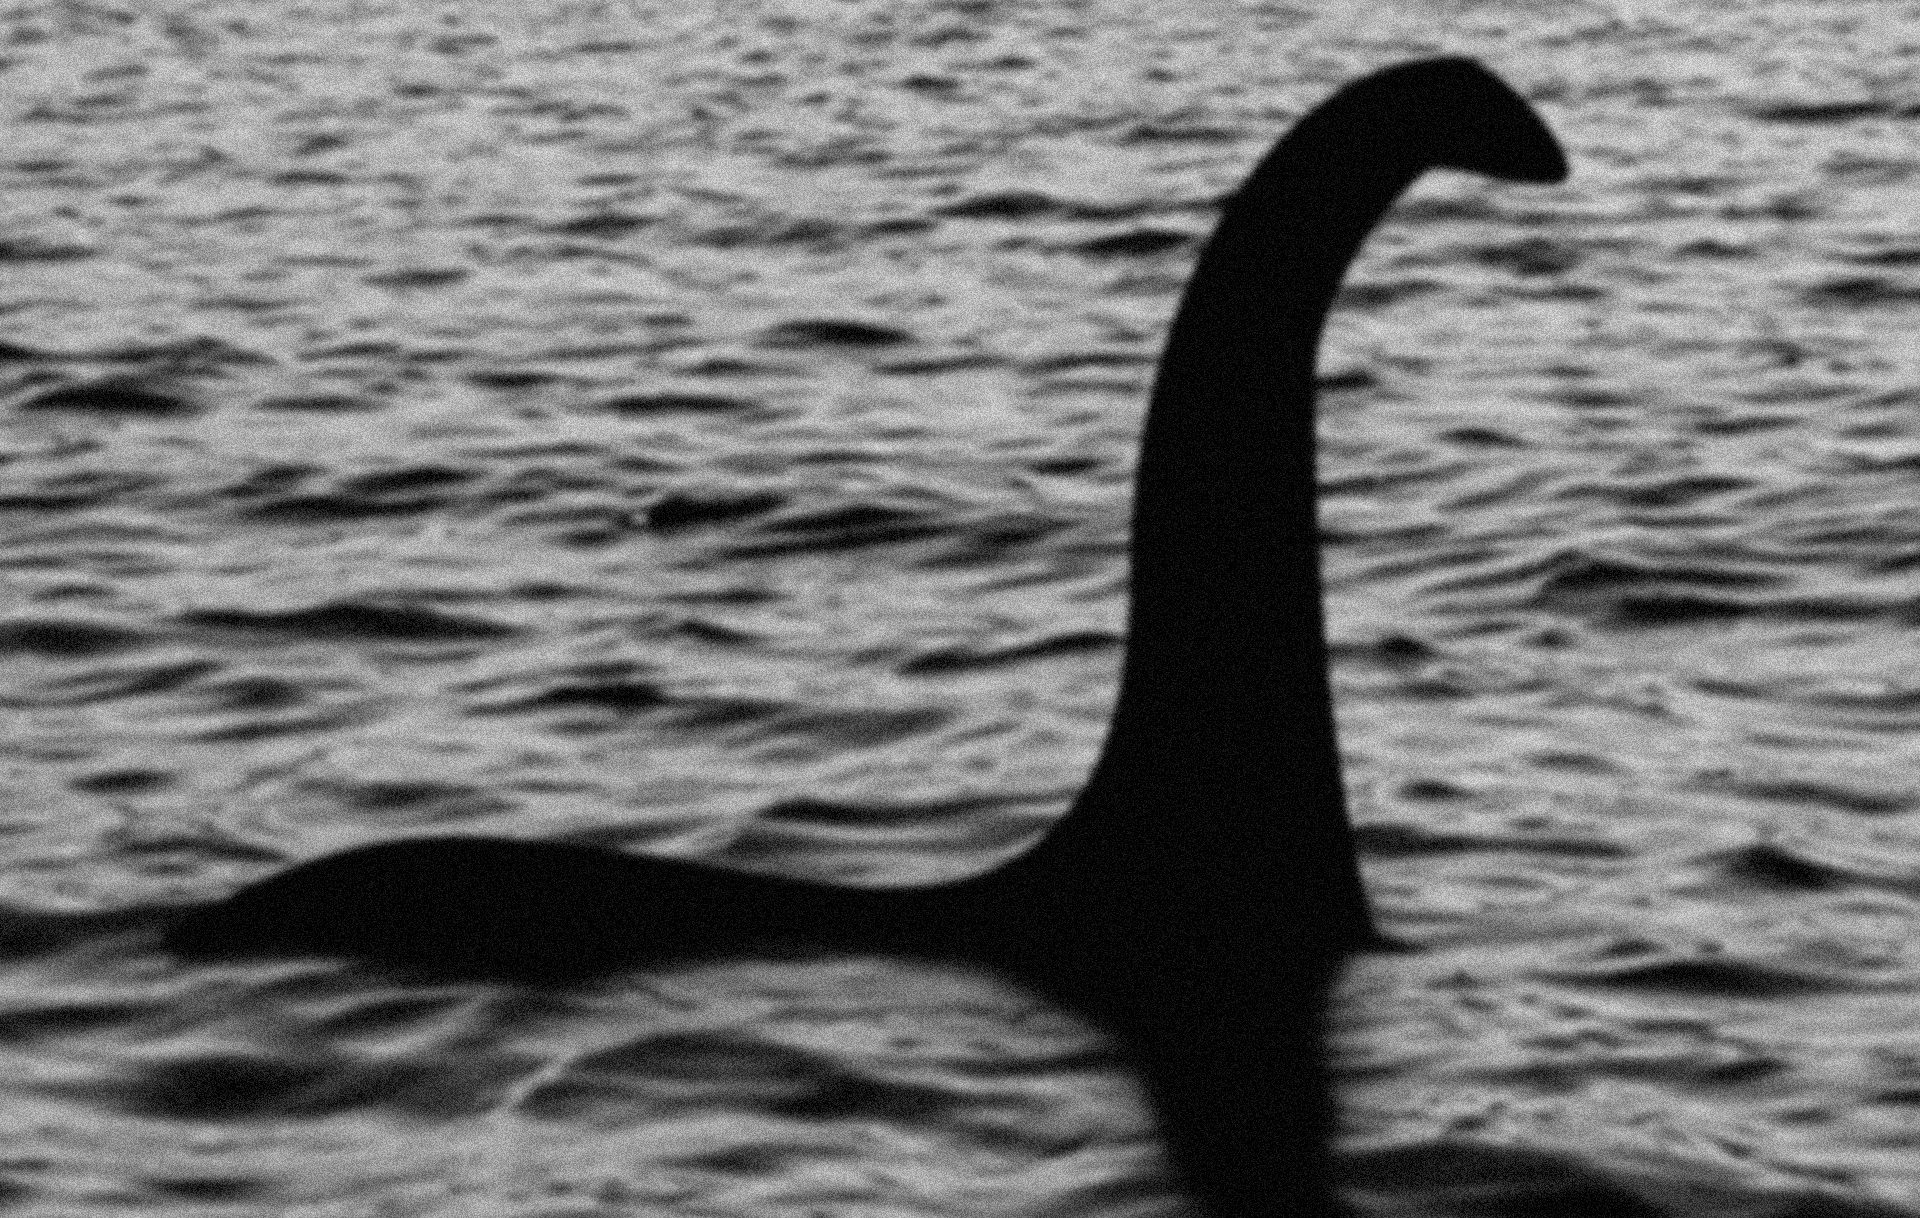 <p>The same thing happens with the Loch Ness monster in Scotland. Before, people even claimed to have taken pictures of him, like this one, but now, no one has reported seeing him.</p>